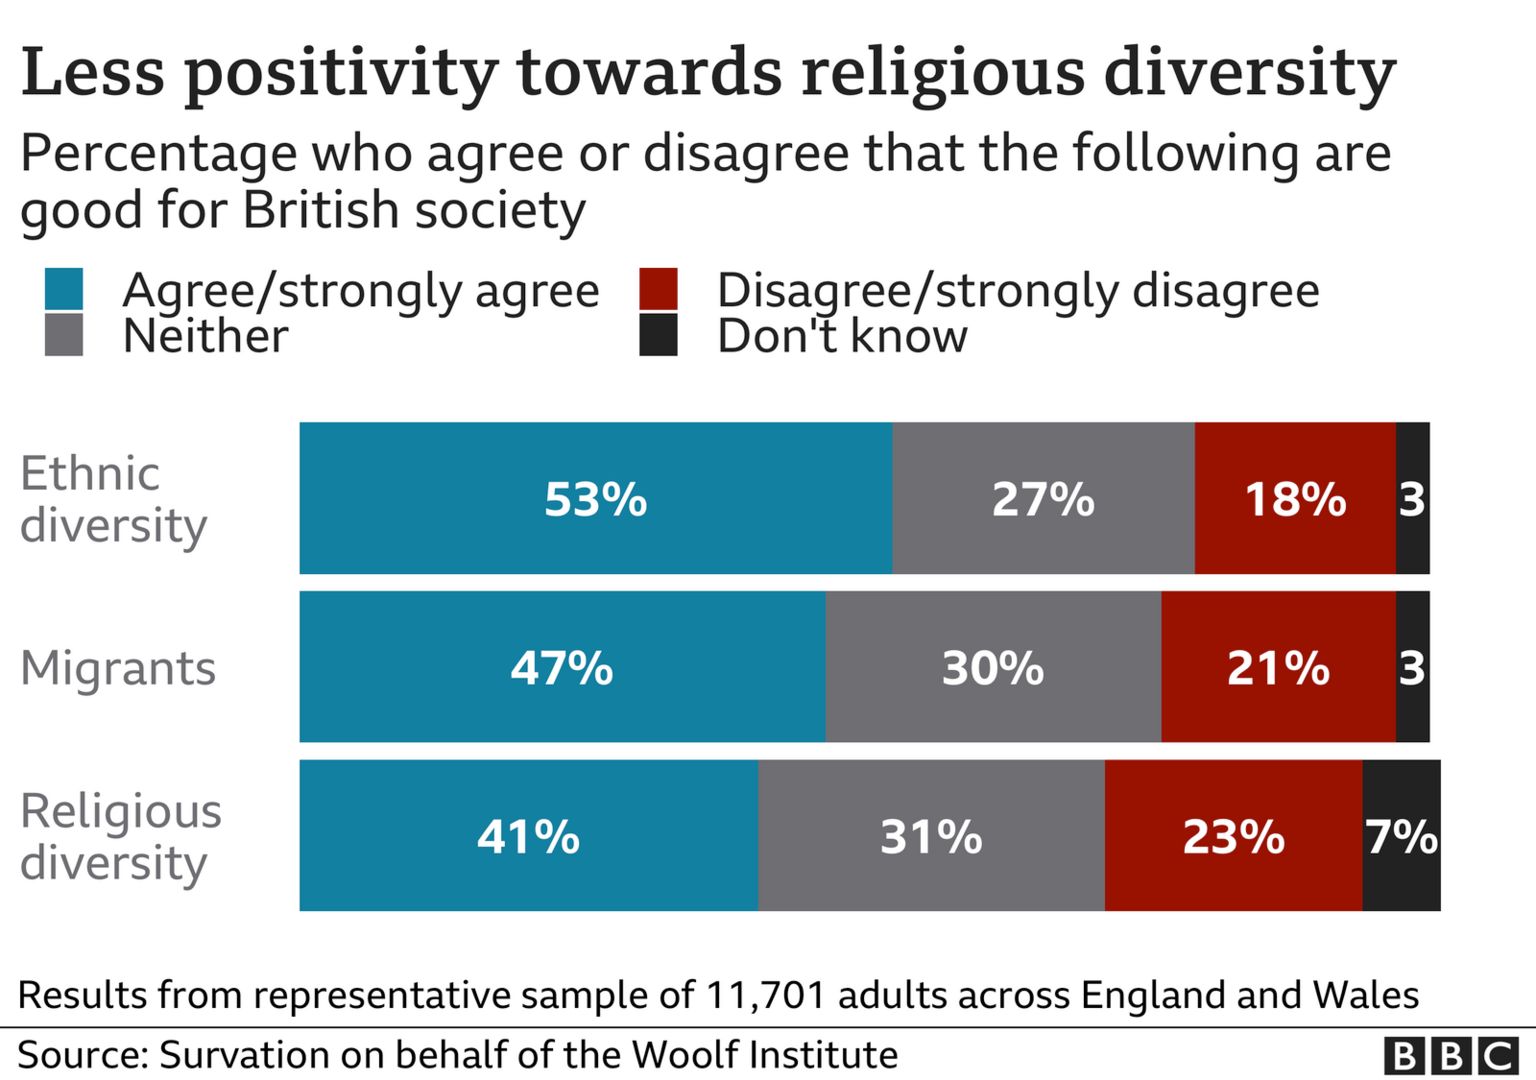 Graphic showing the percentage who agree or disagree that ethnic diversity, migrants and religious diversity are good for British society